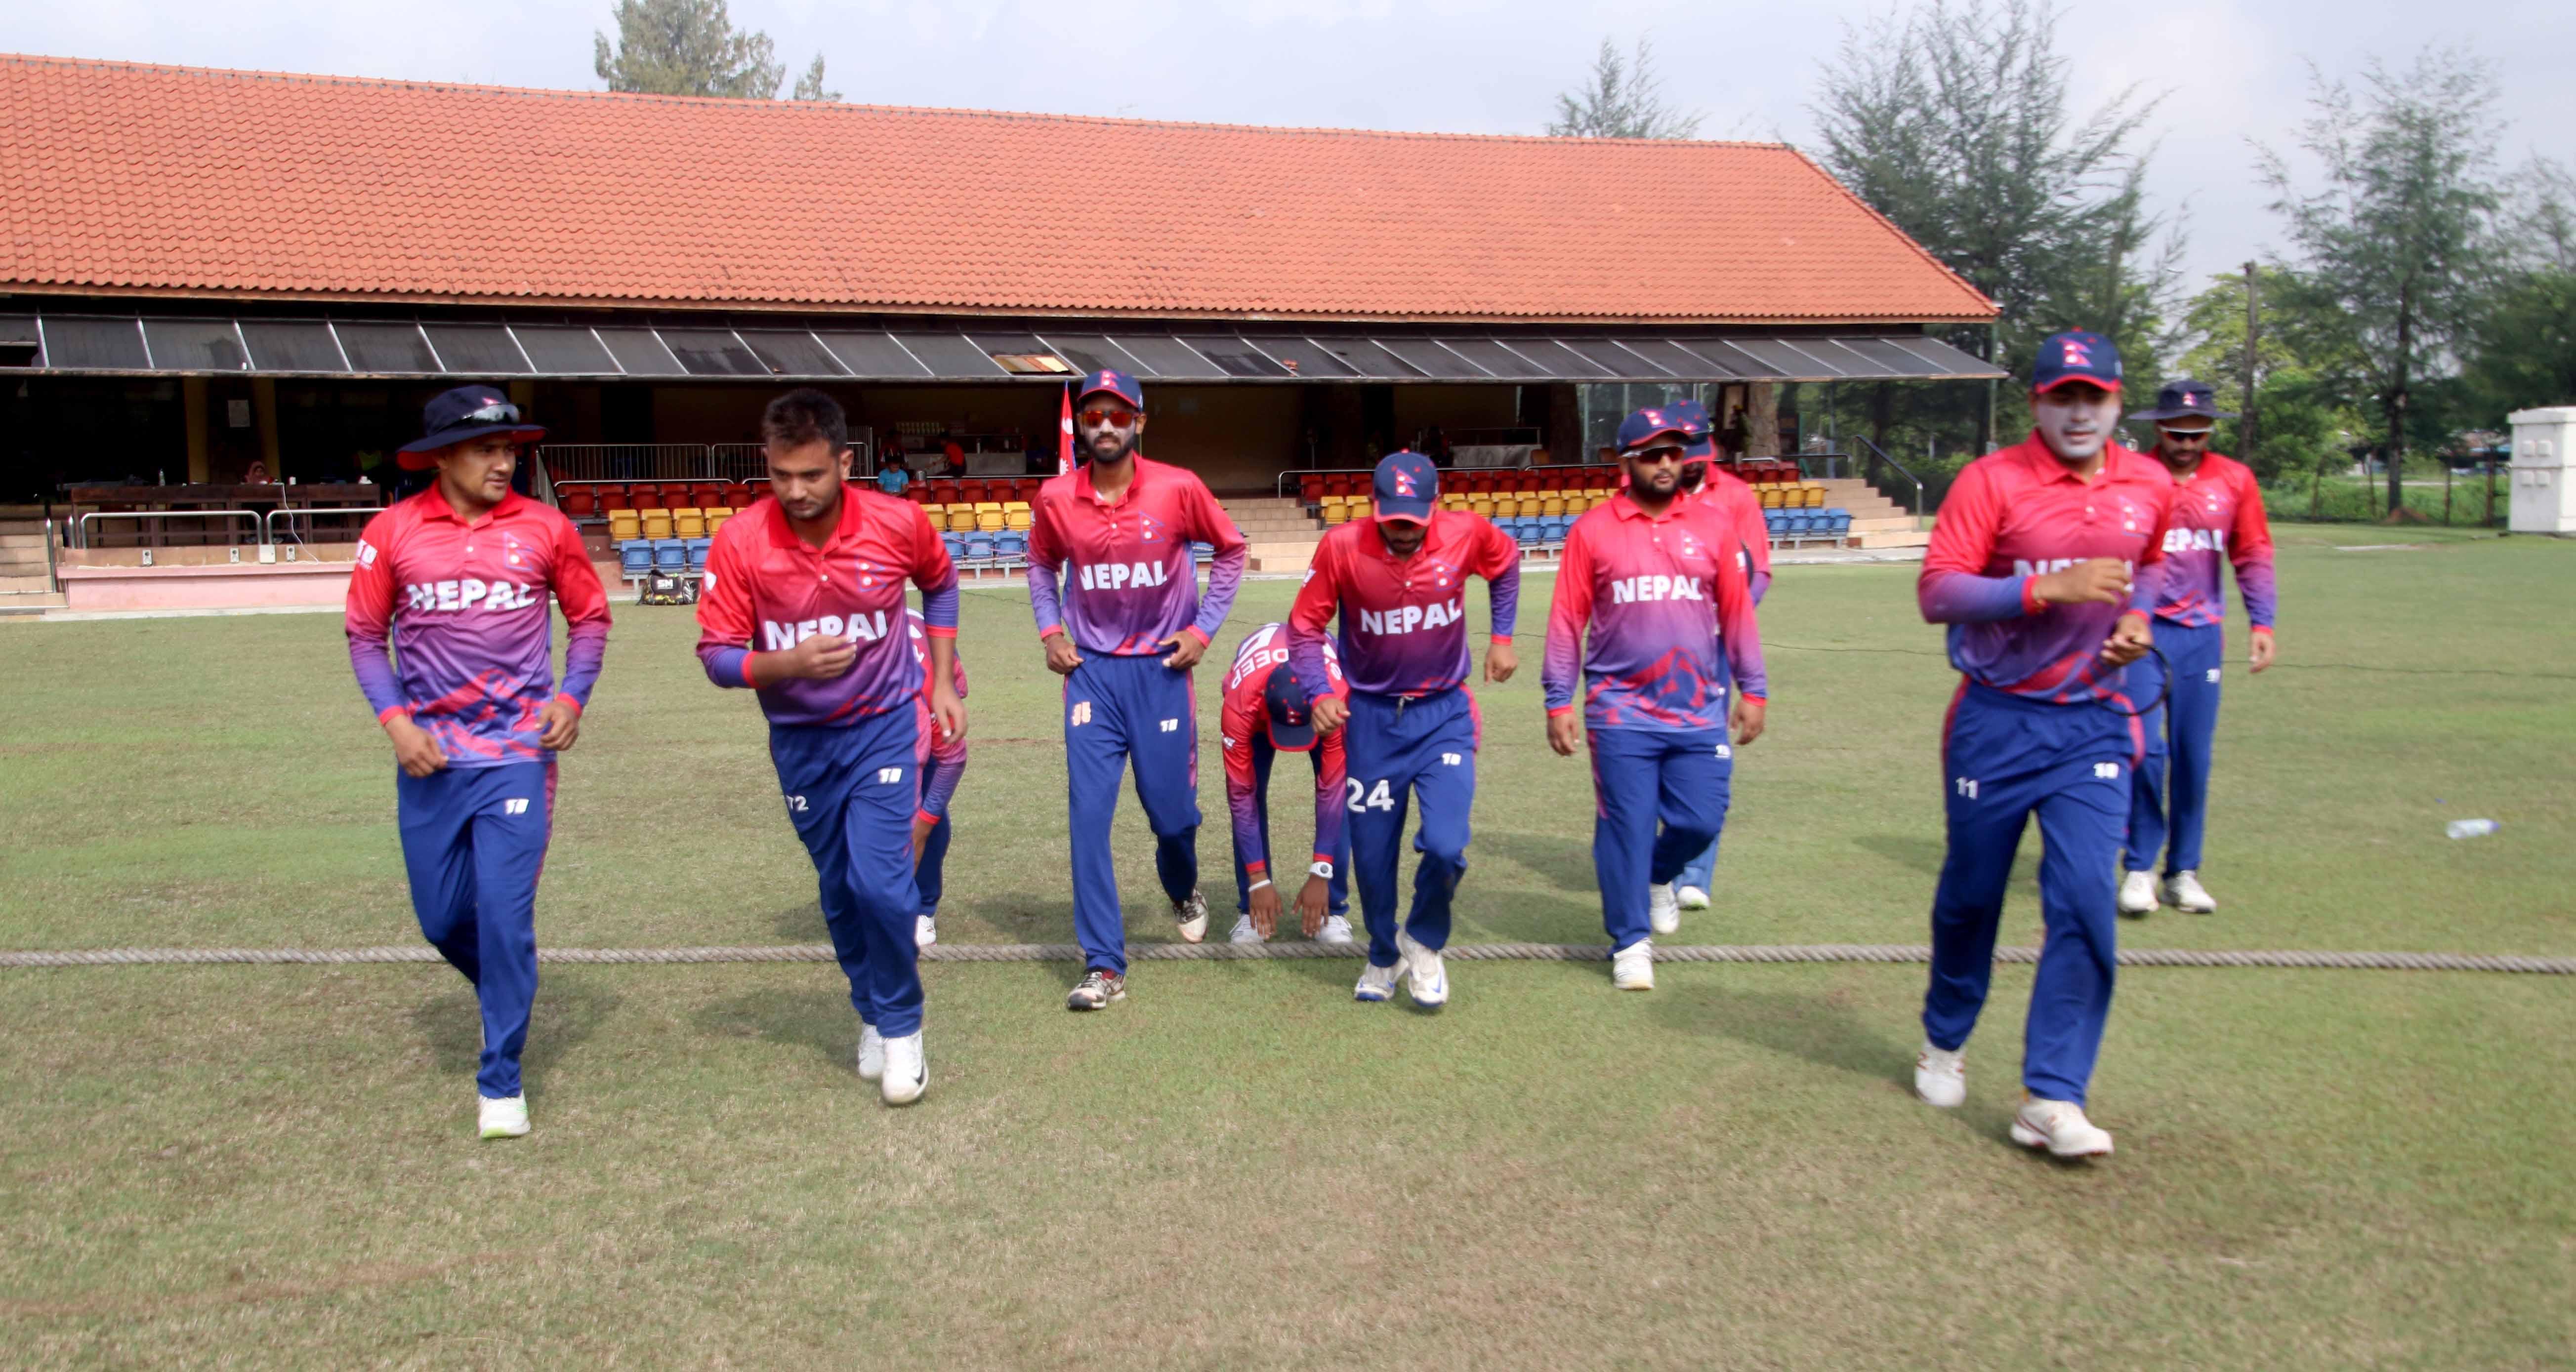 Nepal under pressure to win today's match to remain in T20 International